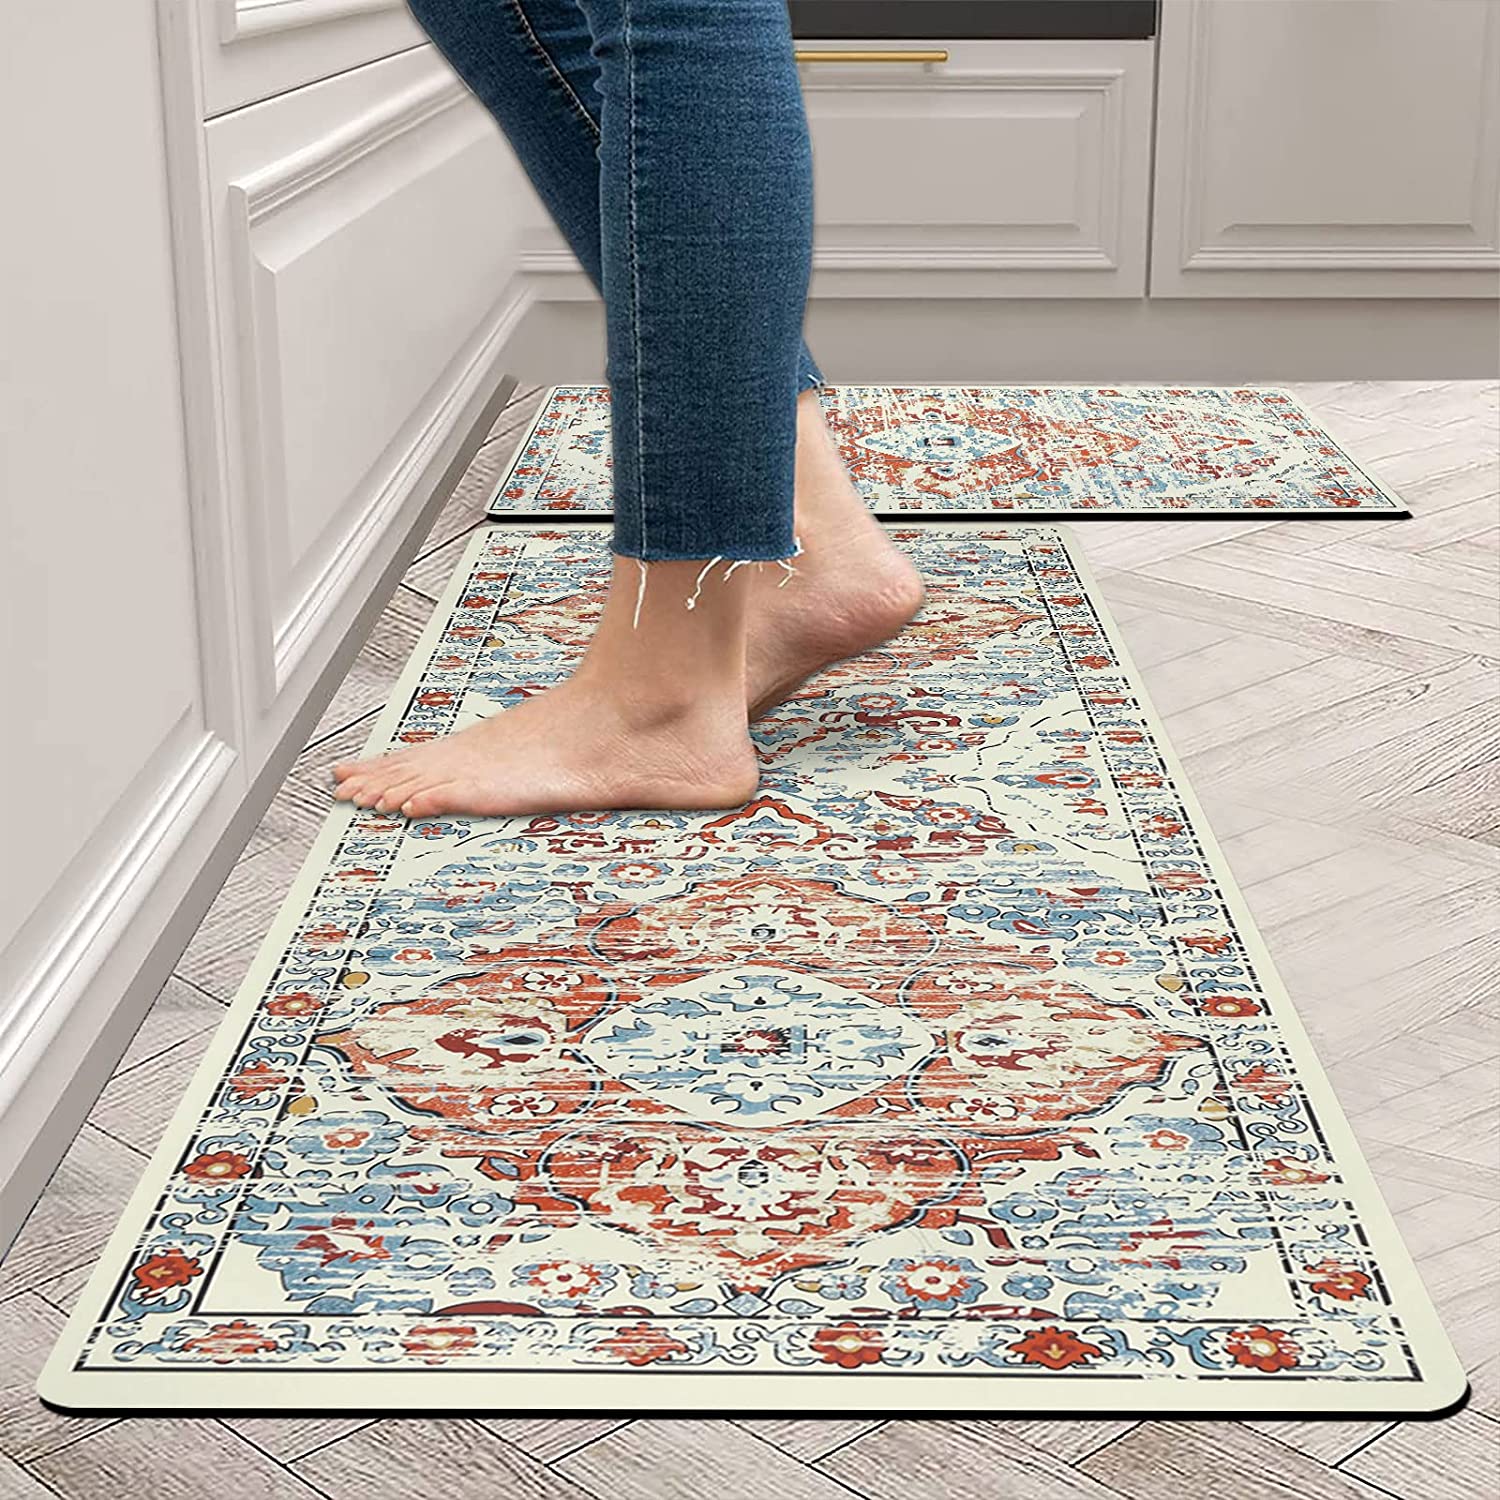  PCSWEET HOME Farmhouse Kitchen Rugs Sets 2 Piece